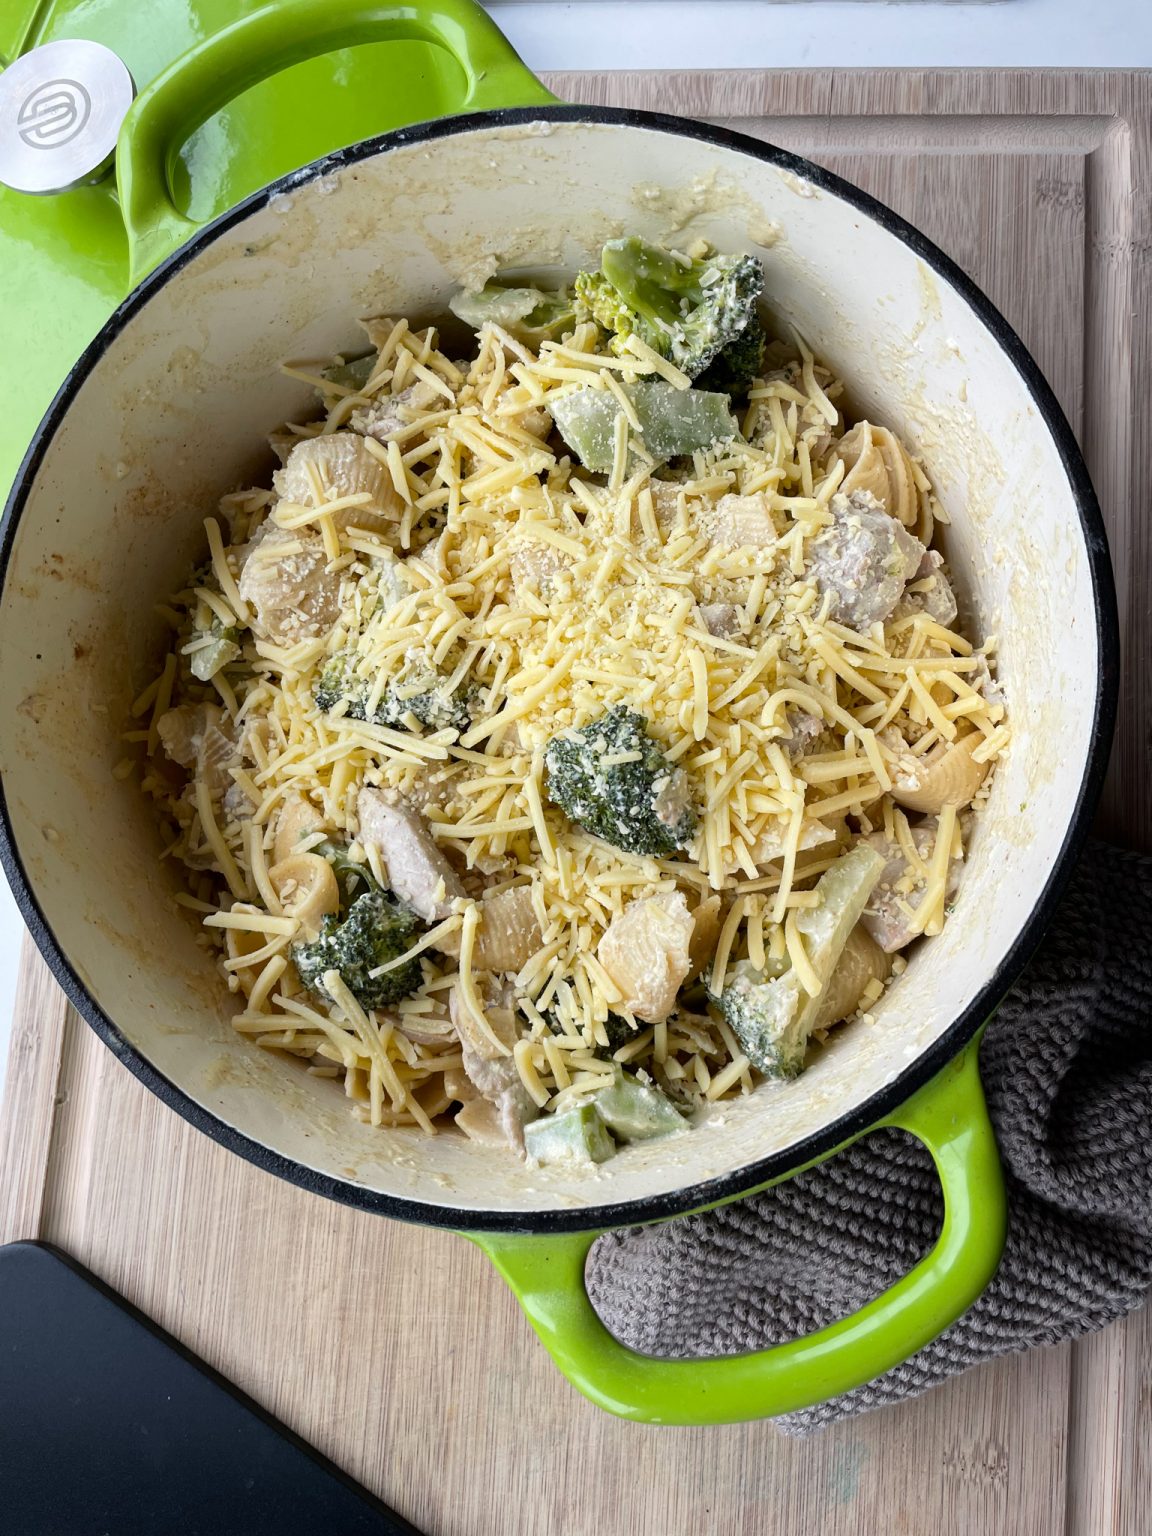 Chicken and Broccoli Pasta Bake - The MacPherson Diaries